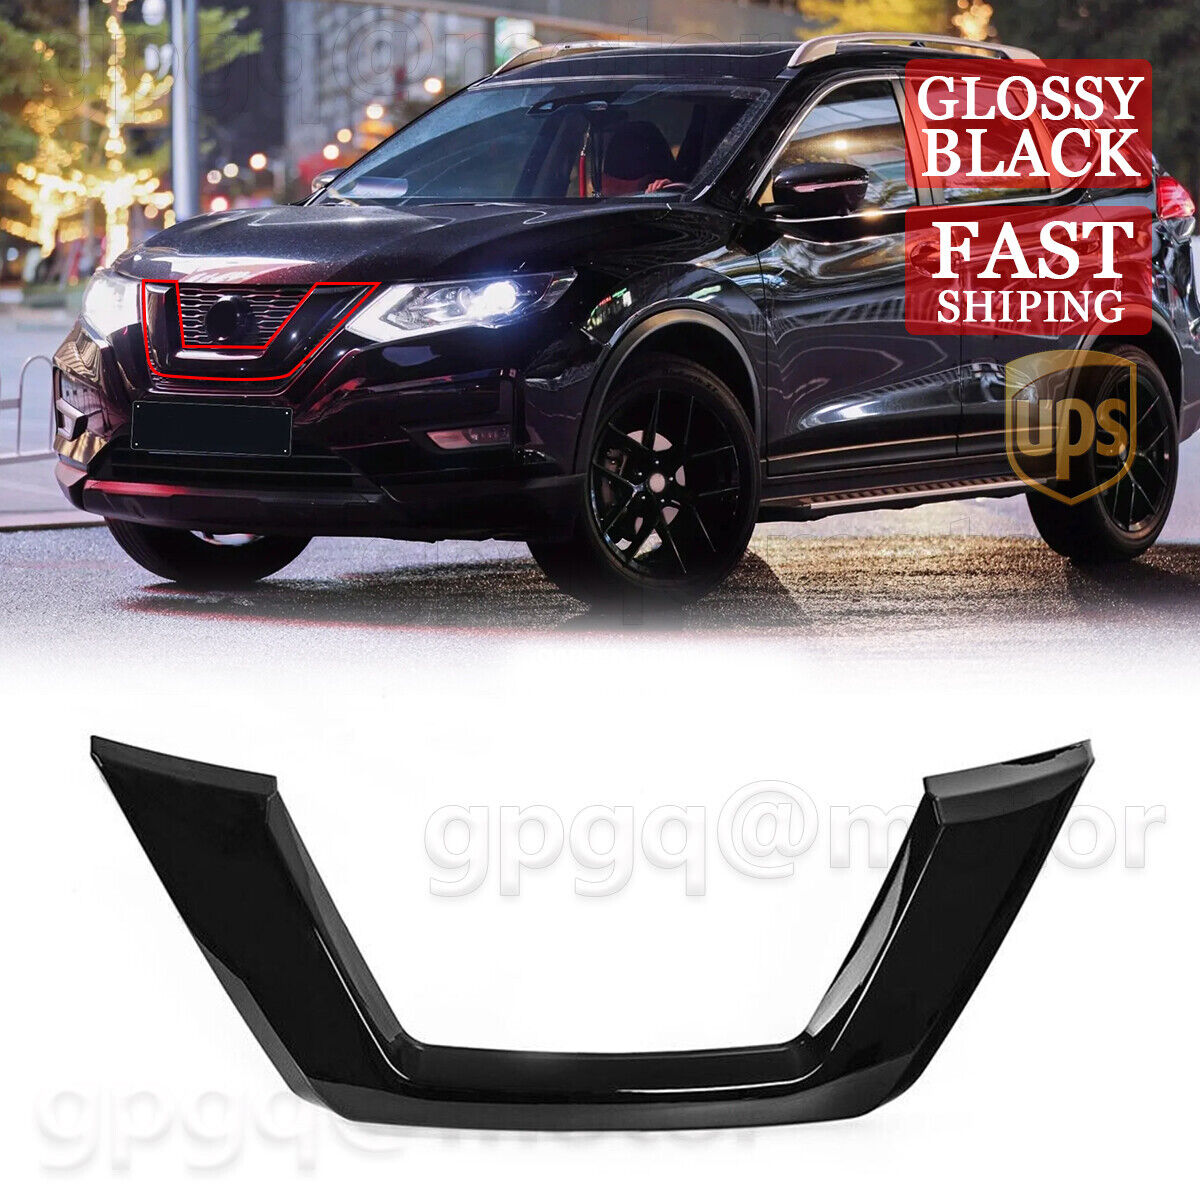 For Nissan Rogue 2017 2018 2019 2020 Gloss Black Front Grille Trim Molding Outer